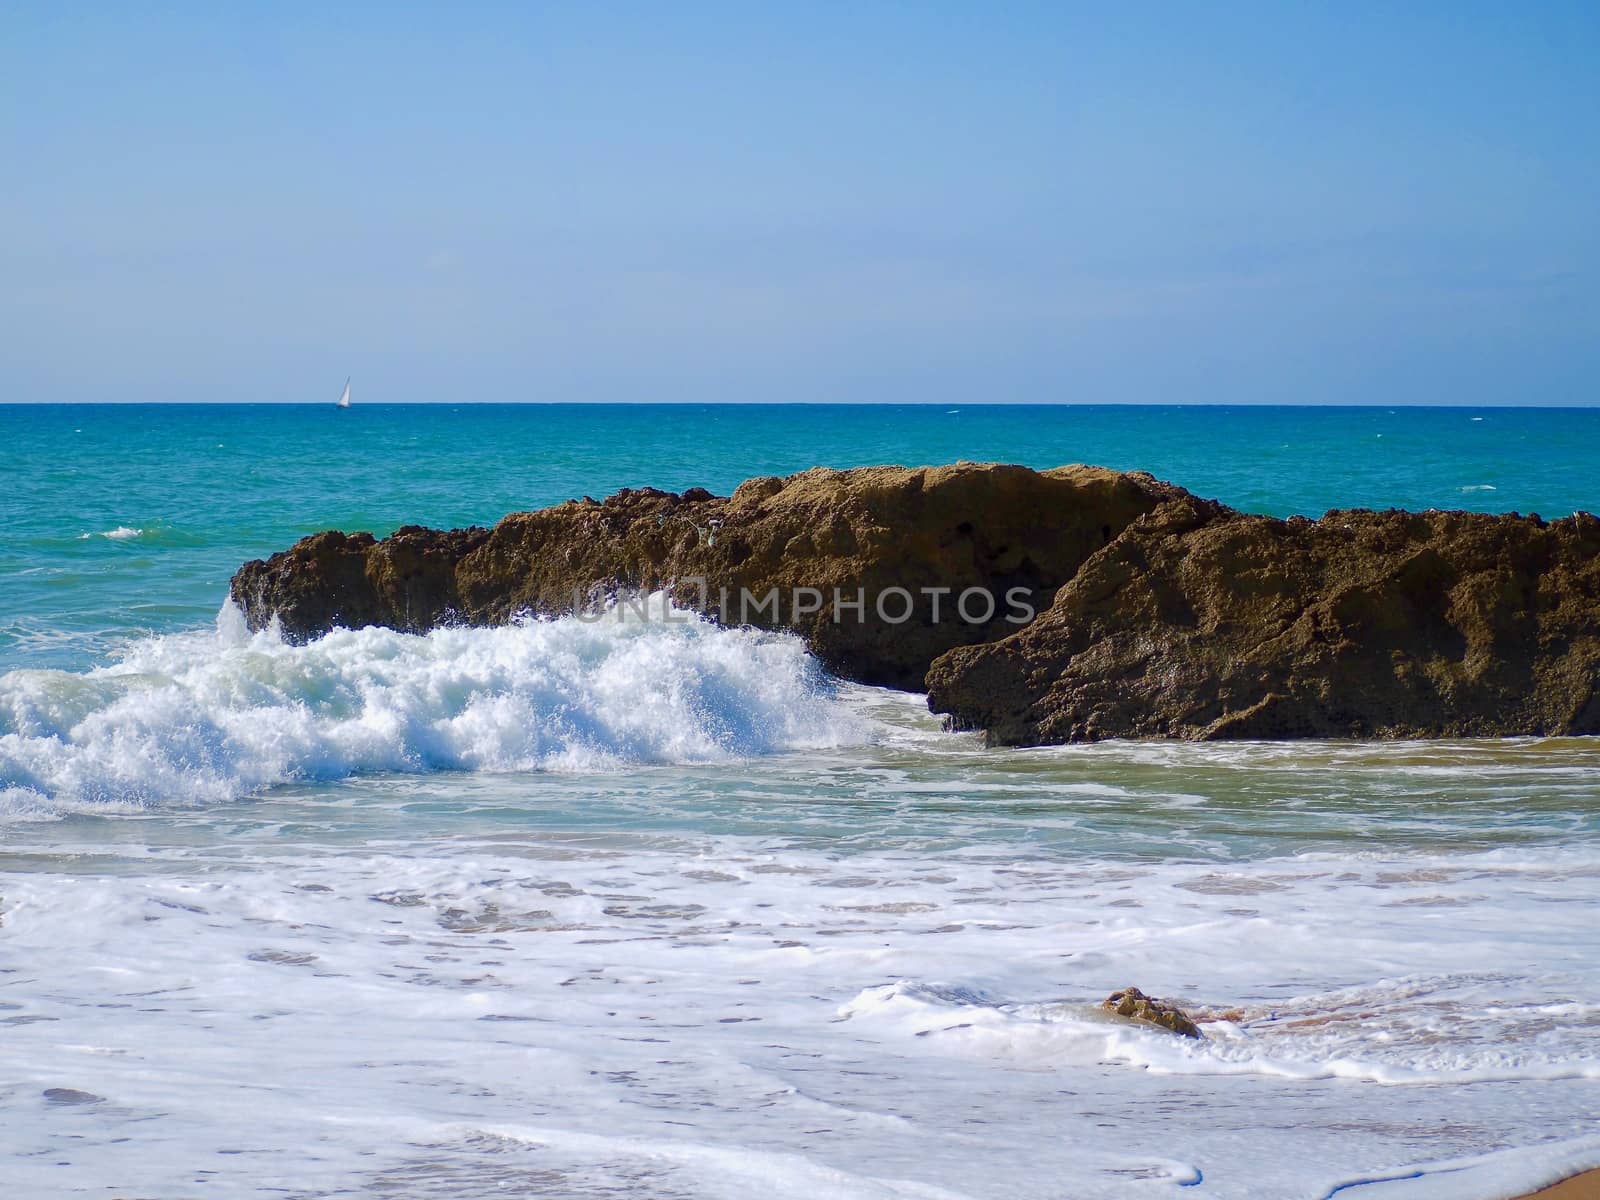 Bic rocks with waves in turquoise ocean